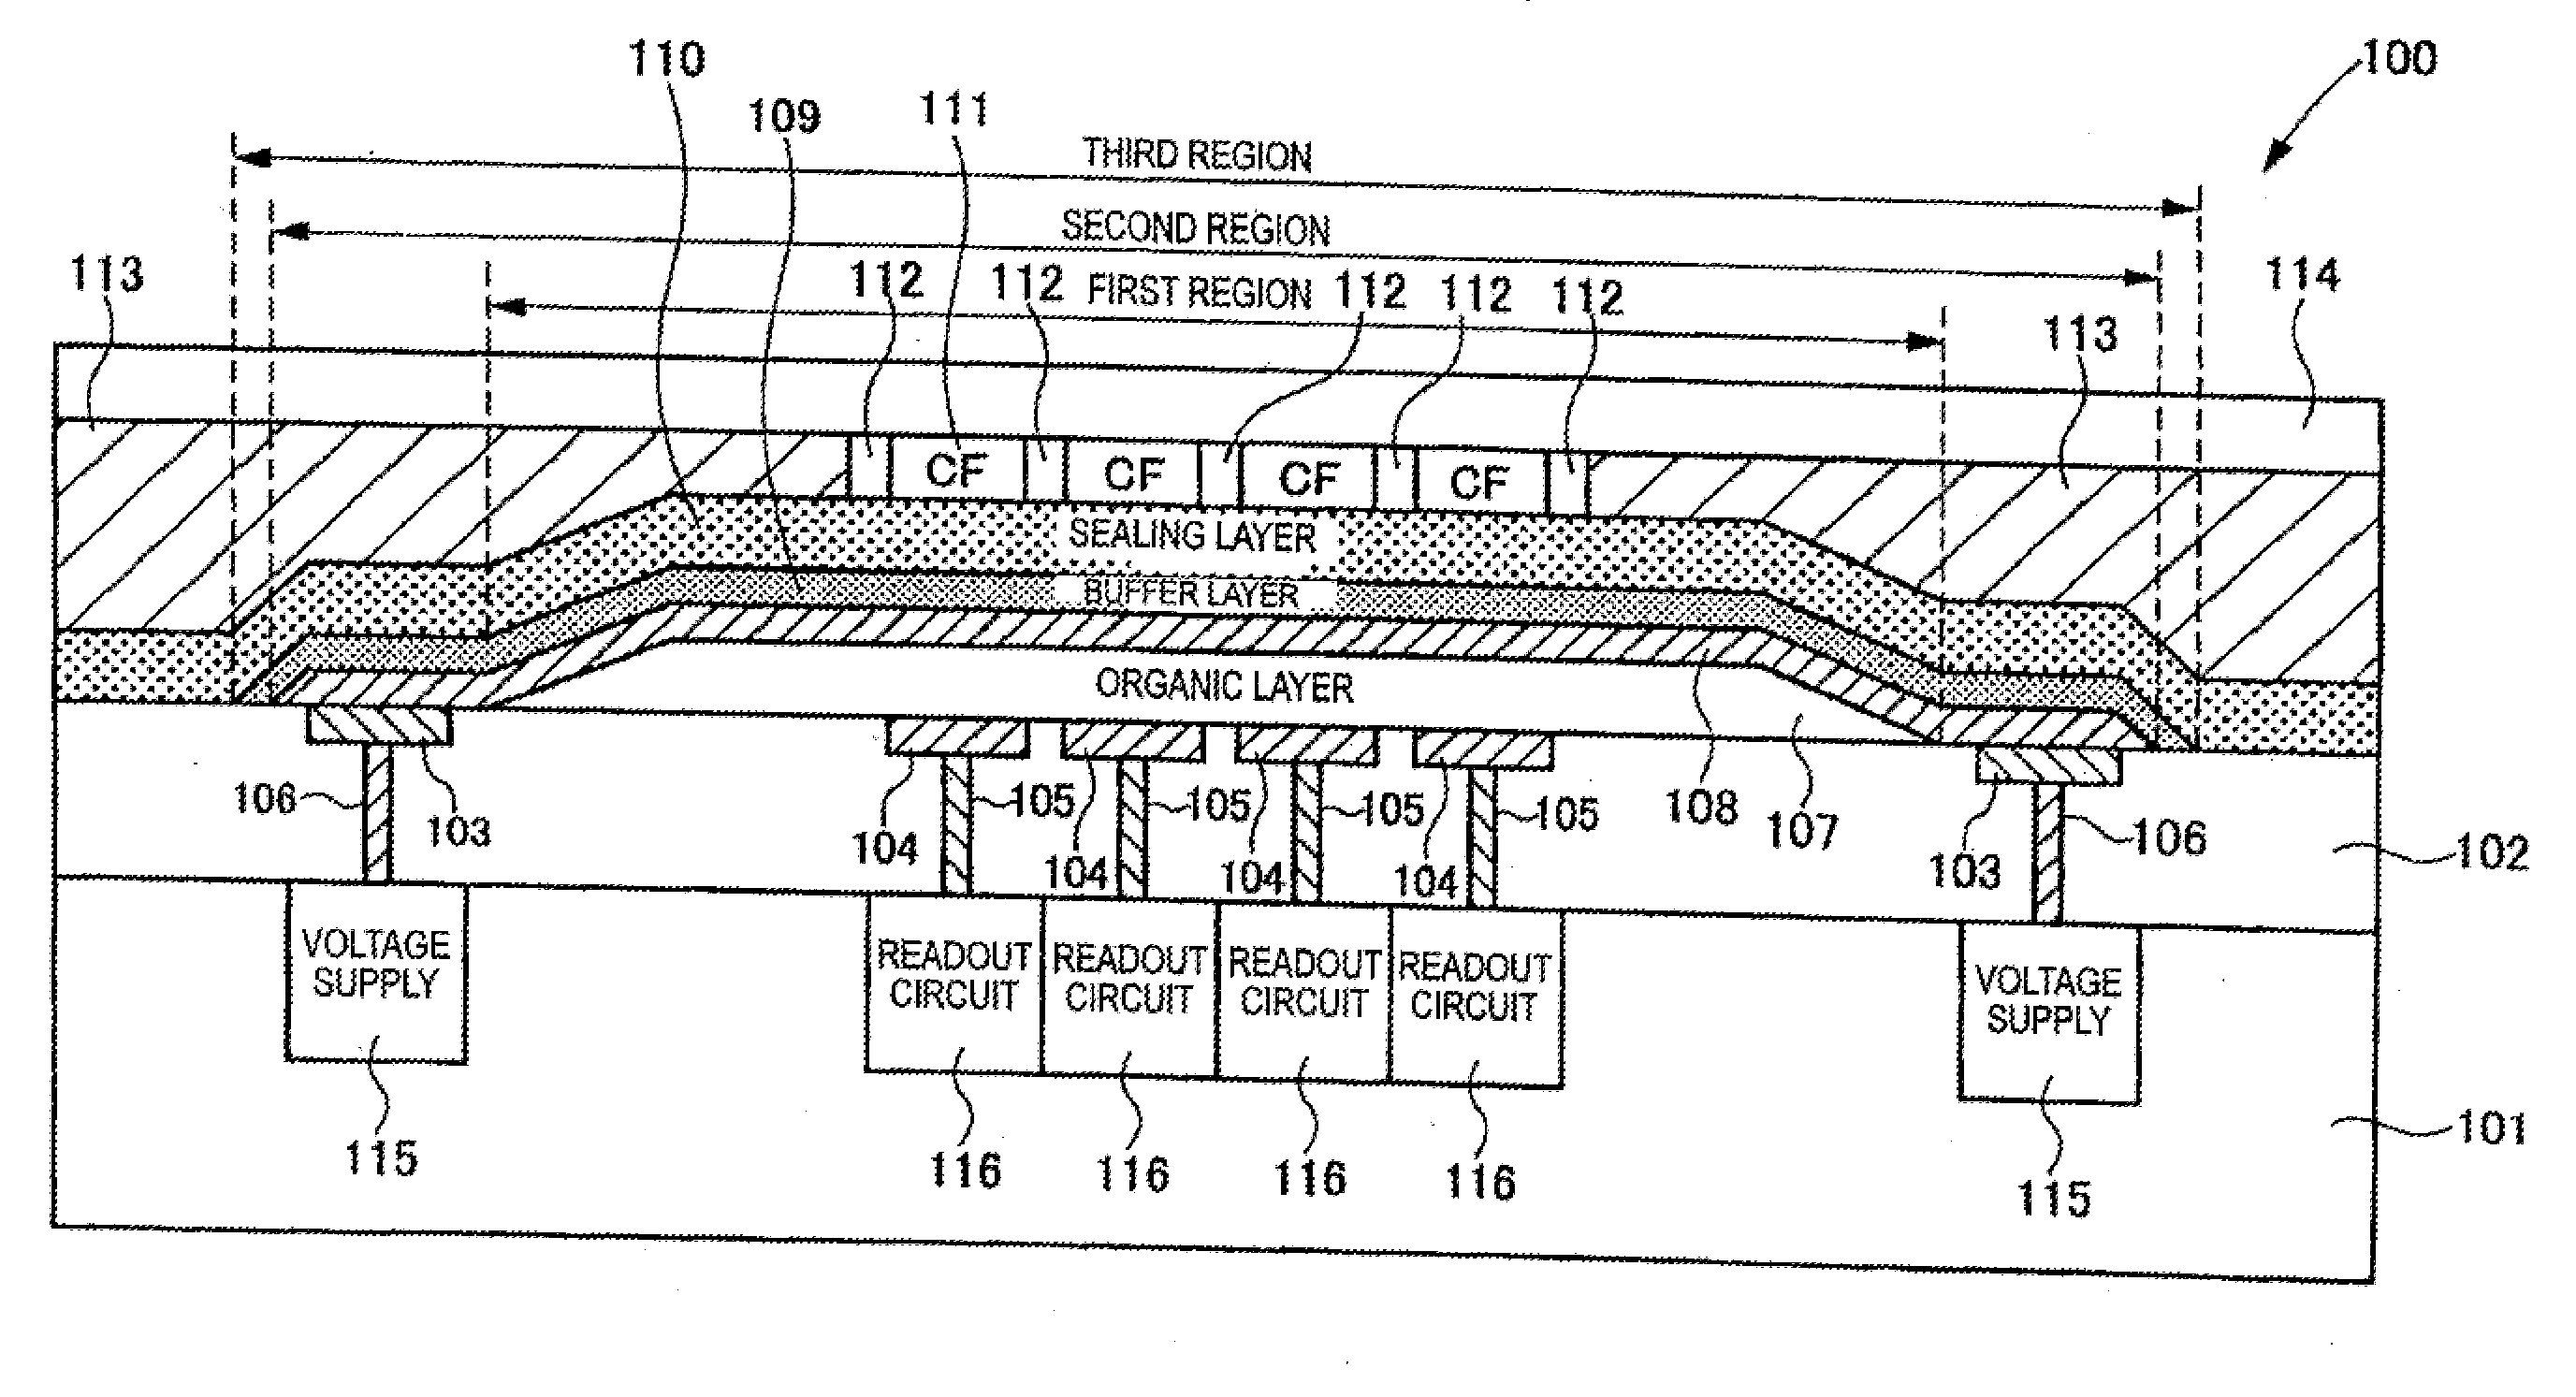 Solid-state imaging device, process of making solid state imaging device, digital still camera, digital video camera, mobile phone, and endoscope